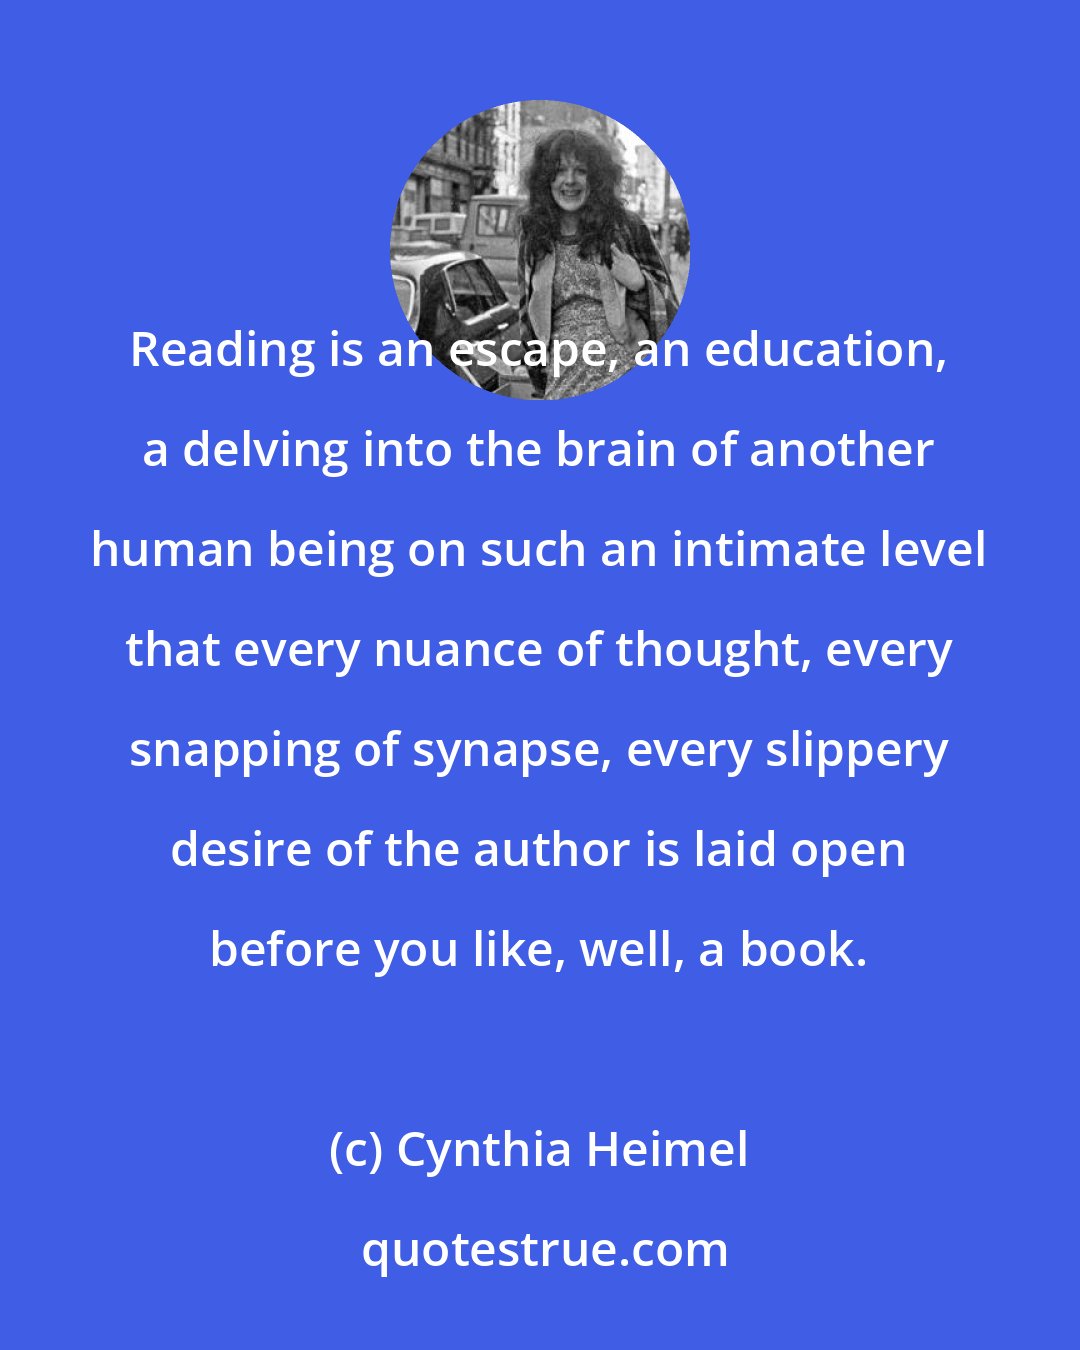 Cynthia Heimel: Reading is an escape, an education, a delving into the brain of another human being on such an intimate level that every nuance of thought, every snapping of synapse, every slippery desire of the author is laid open before you like, well, a book.